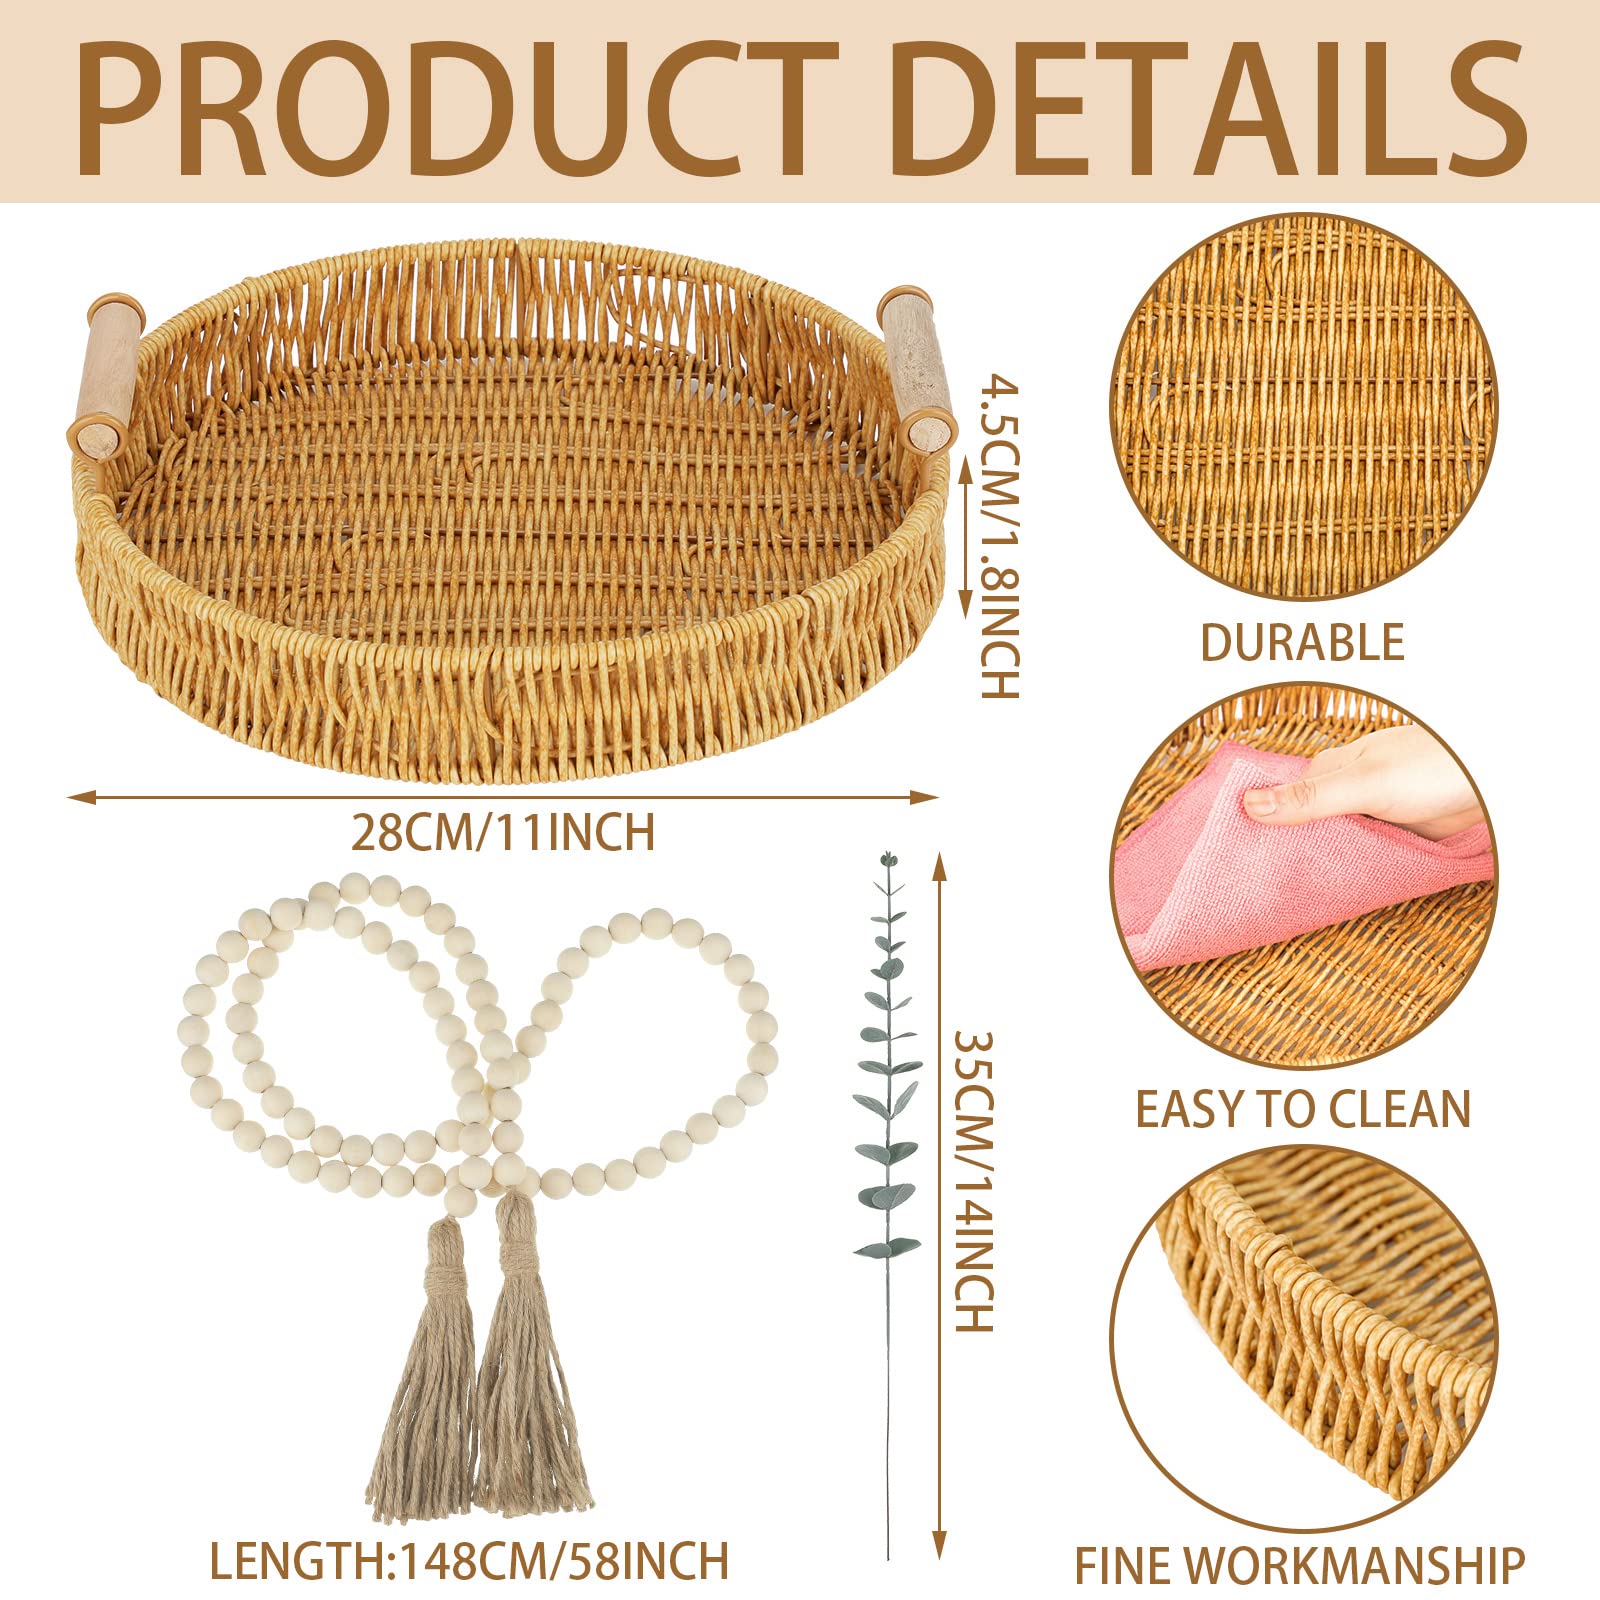 8 Pcs Boho Farmhouse Coffee Table Tray Set 11 Inch Wicker Rattan Serving Tray with Handles Round Rattan Tray Basket Wood Bead Garland with Tassels 6 Artificial Eucalyptus Leaves for Home Fall Decor